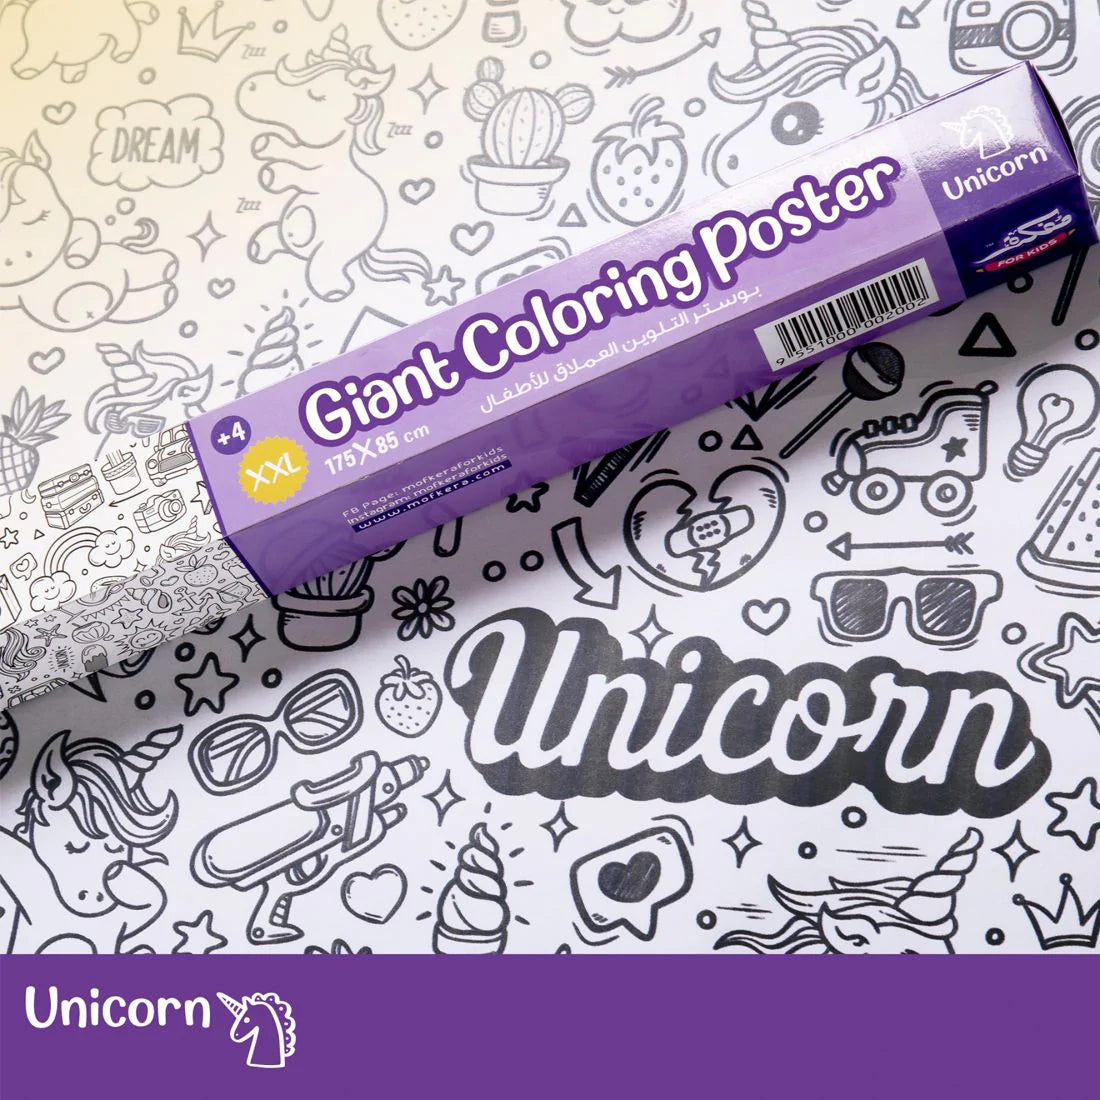 Unicorn world - Giant coloring poster